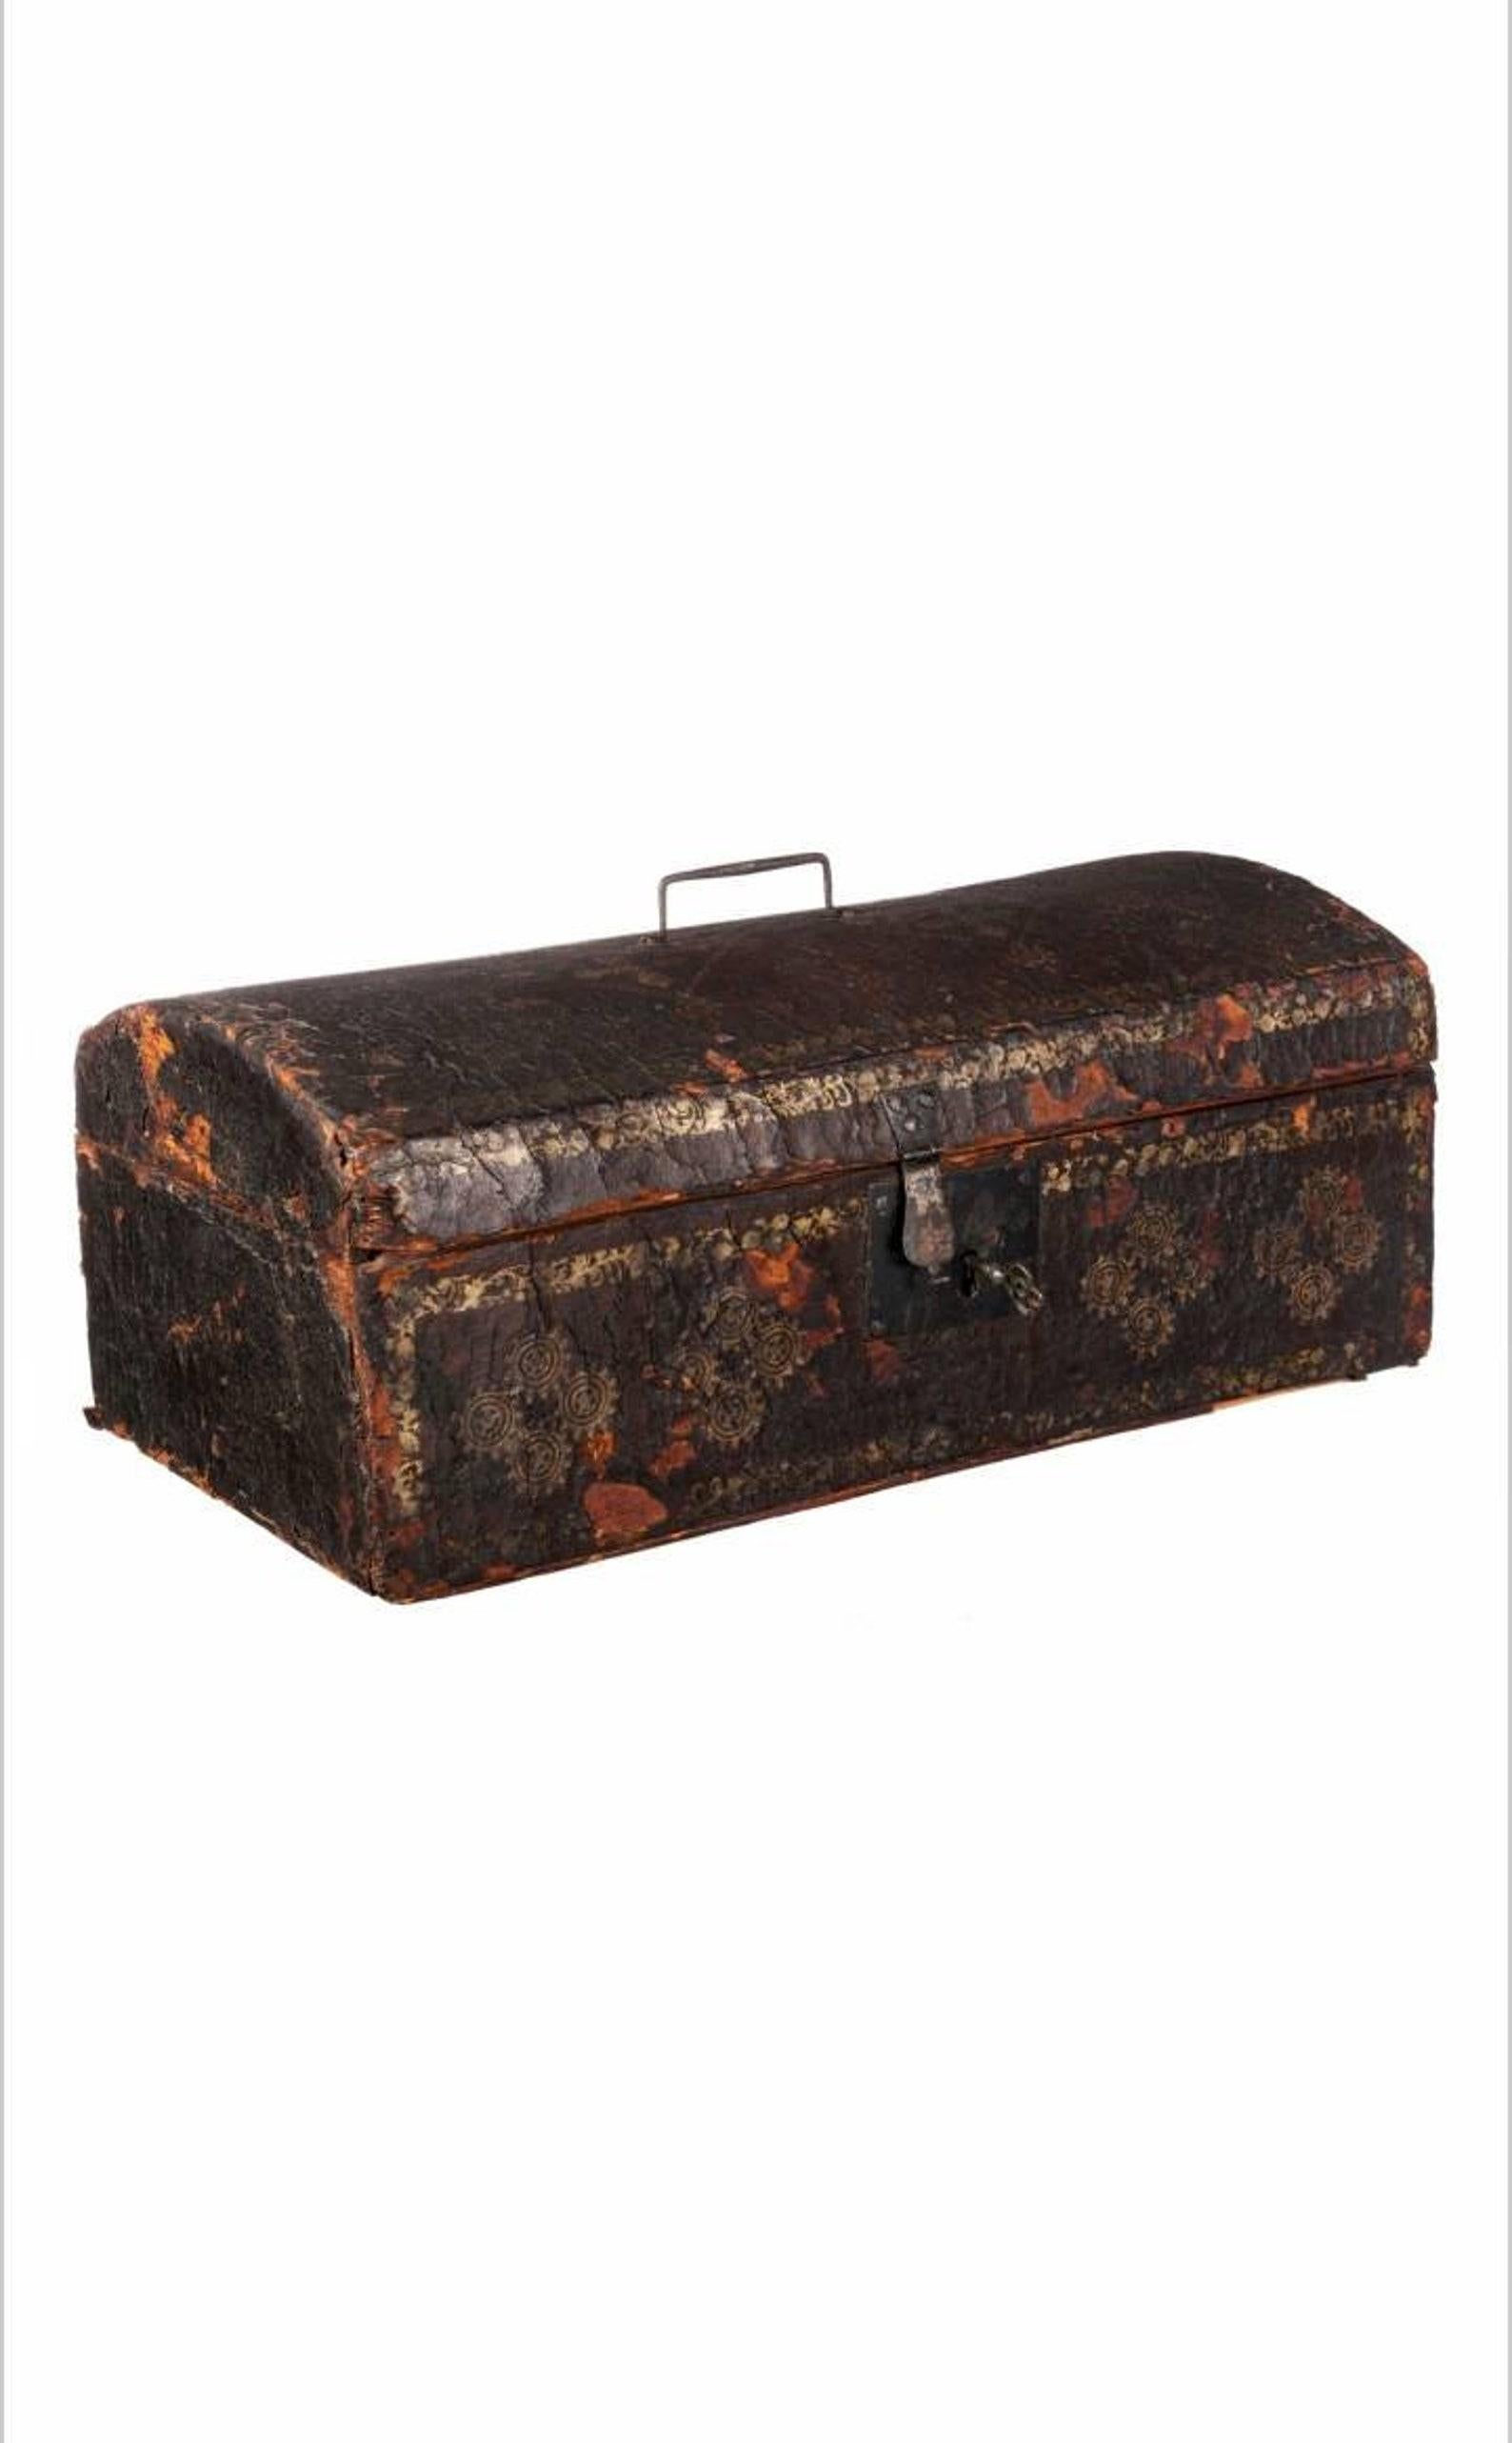 An important historic Long Island 18th Century document box, American Revolution era, having a rectangular chest with dome shaped hinged lid, wrapped in the original naturally distressed hide covering with gilt gold-leaf decoration, original lockset